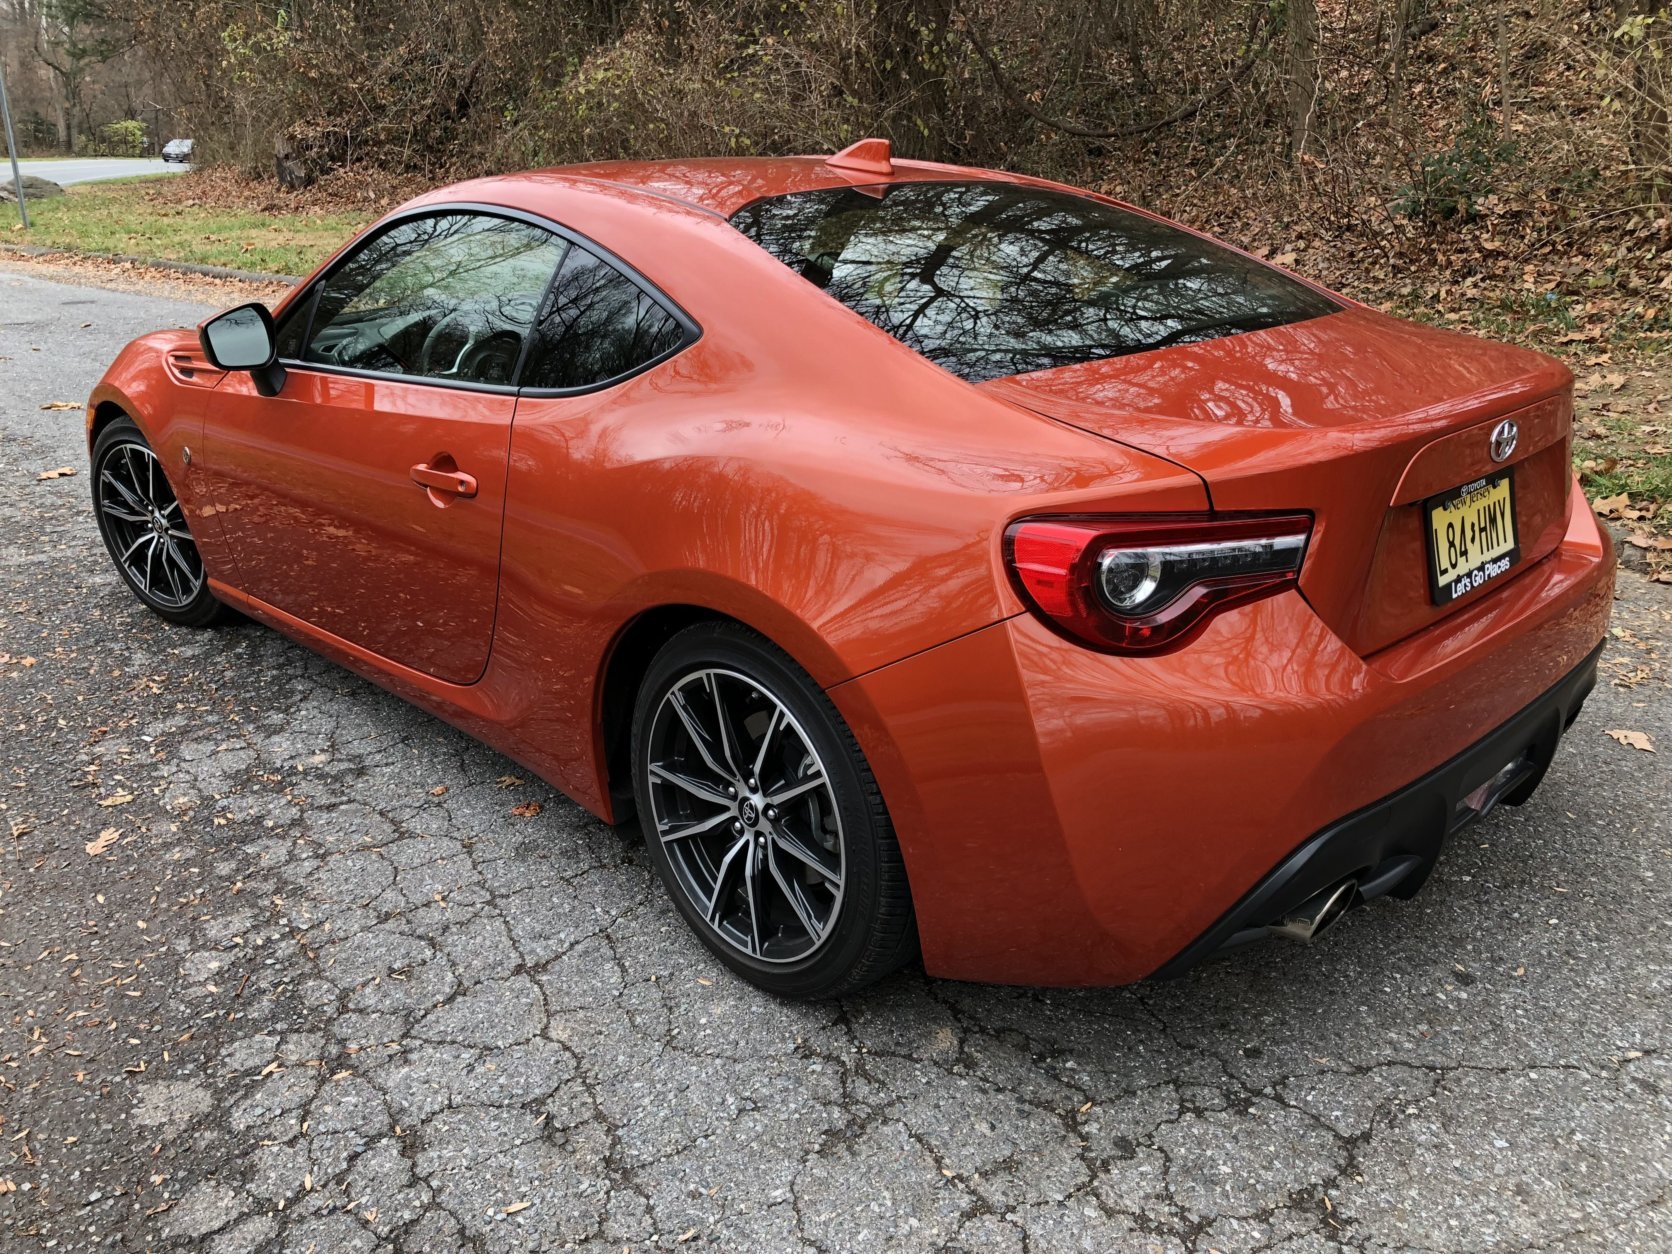 The 86 sits low and has even less ground clearance with the optional lowering springs. The 17-inch wheels with low profile tires sit just right in the wheel wells. (WTOP/Mike Parris)